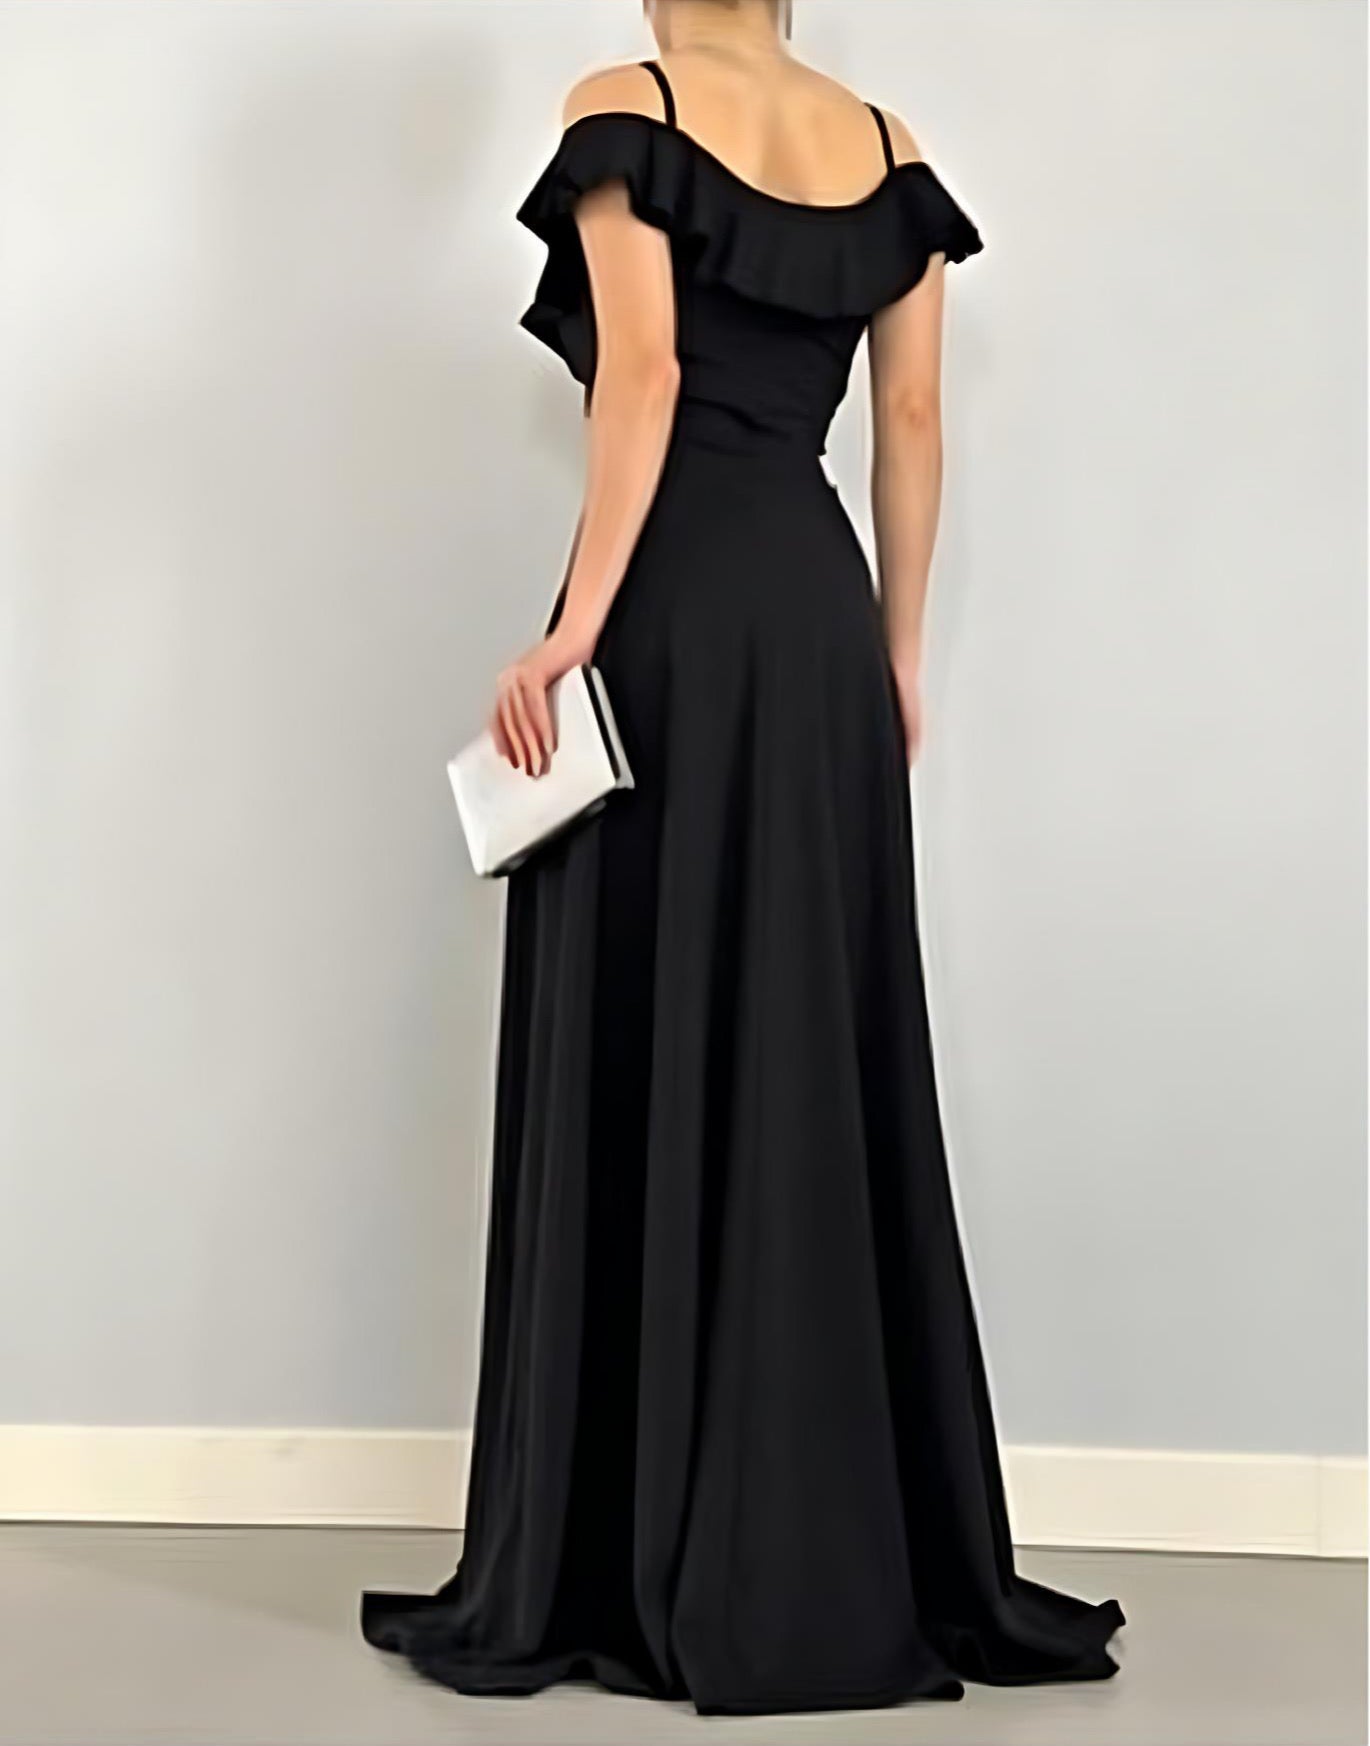 Off-Shoulder Maxi Dress with Spaghetti Straps and Long Slit - Black